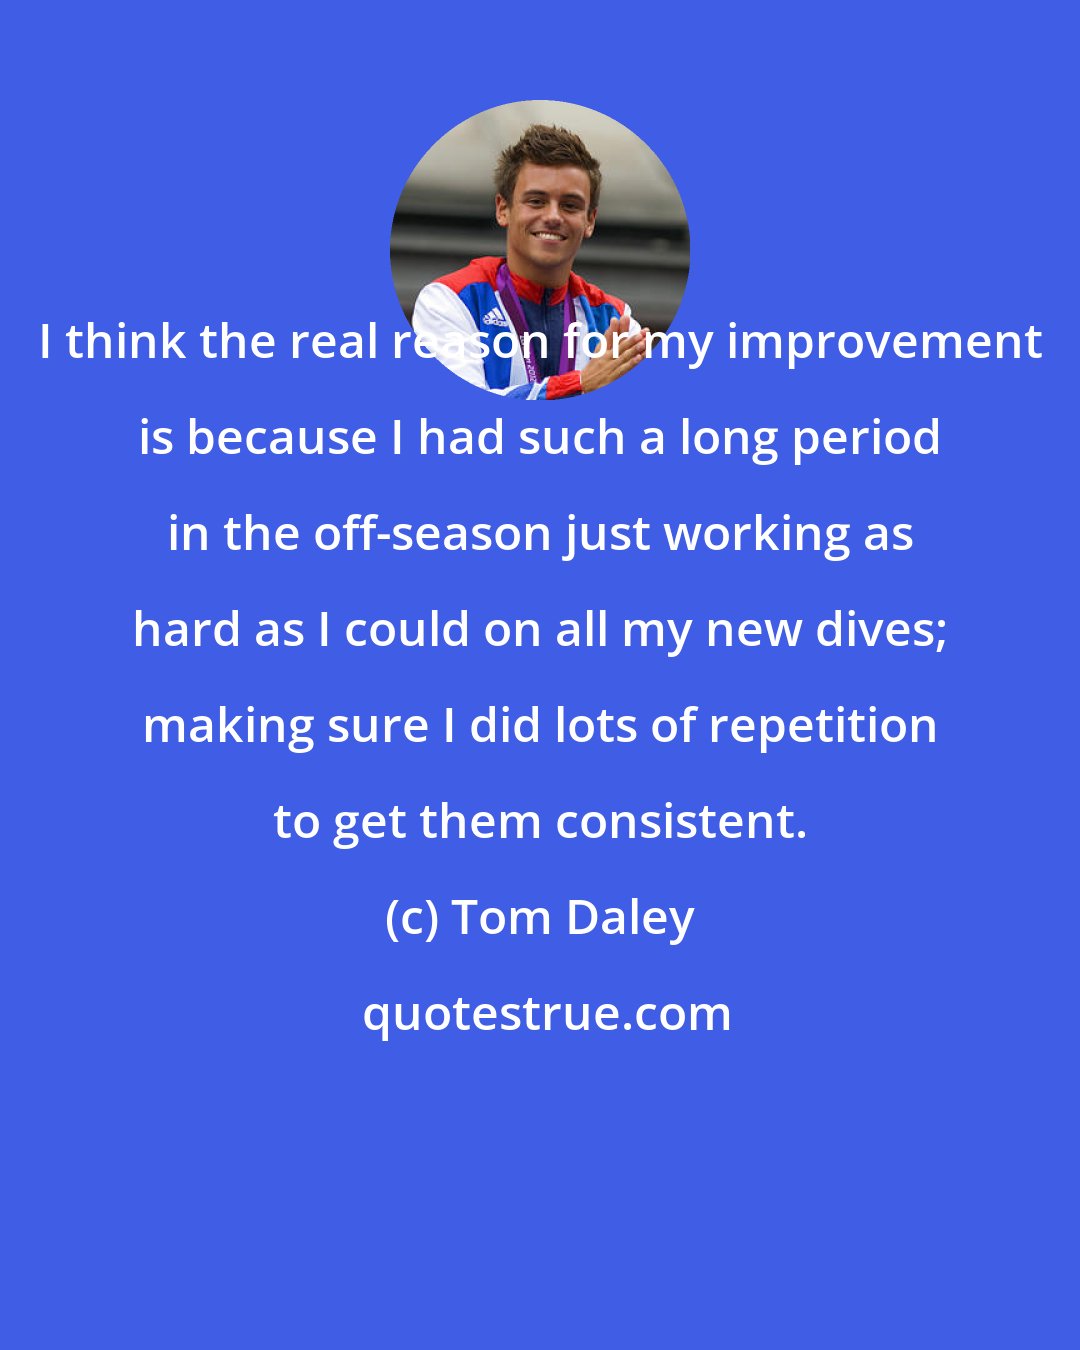 Tom Daley: I think the real reason for my improvement is because I had such a long period in the off-season just working as hard as I could on all my new dives; making sure I did lots of repetition to get them consistent.